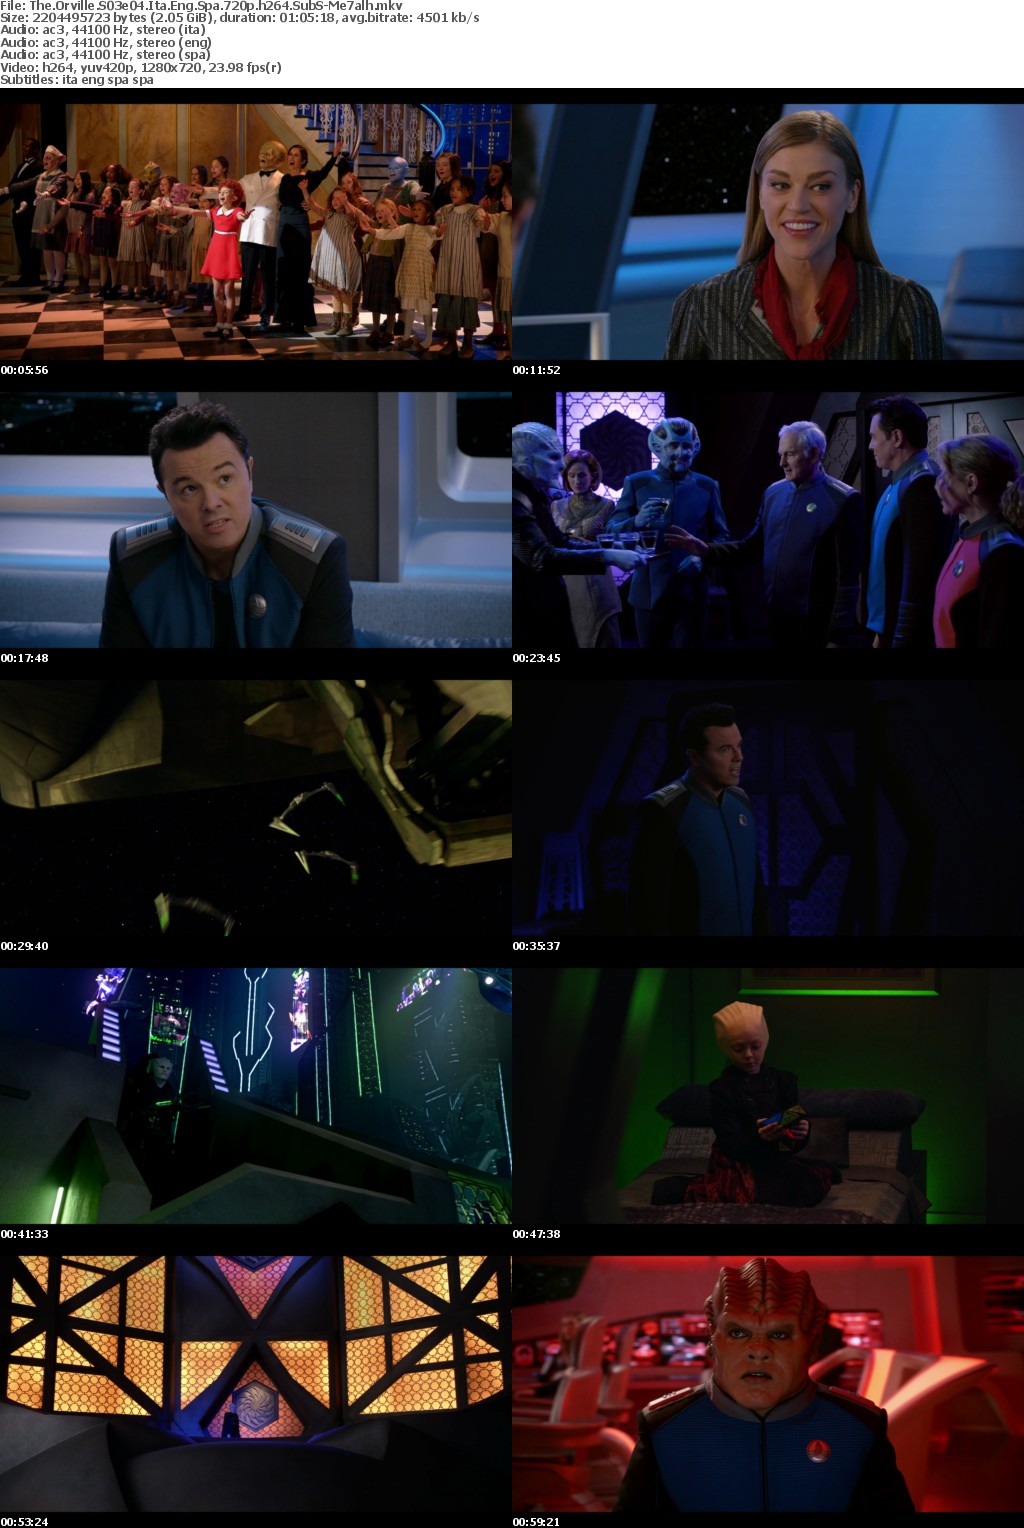 The Orville S03e04-05 720p Ita Eng Spa SubS MirCrewRelease byMe7alh